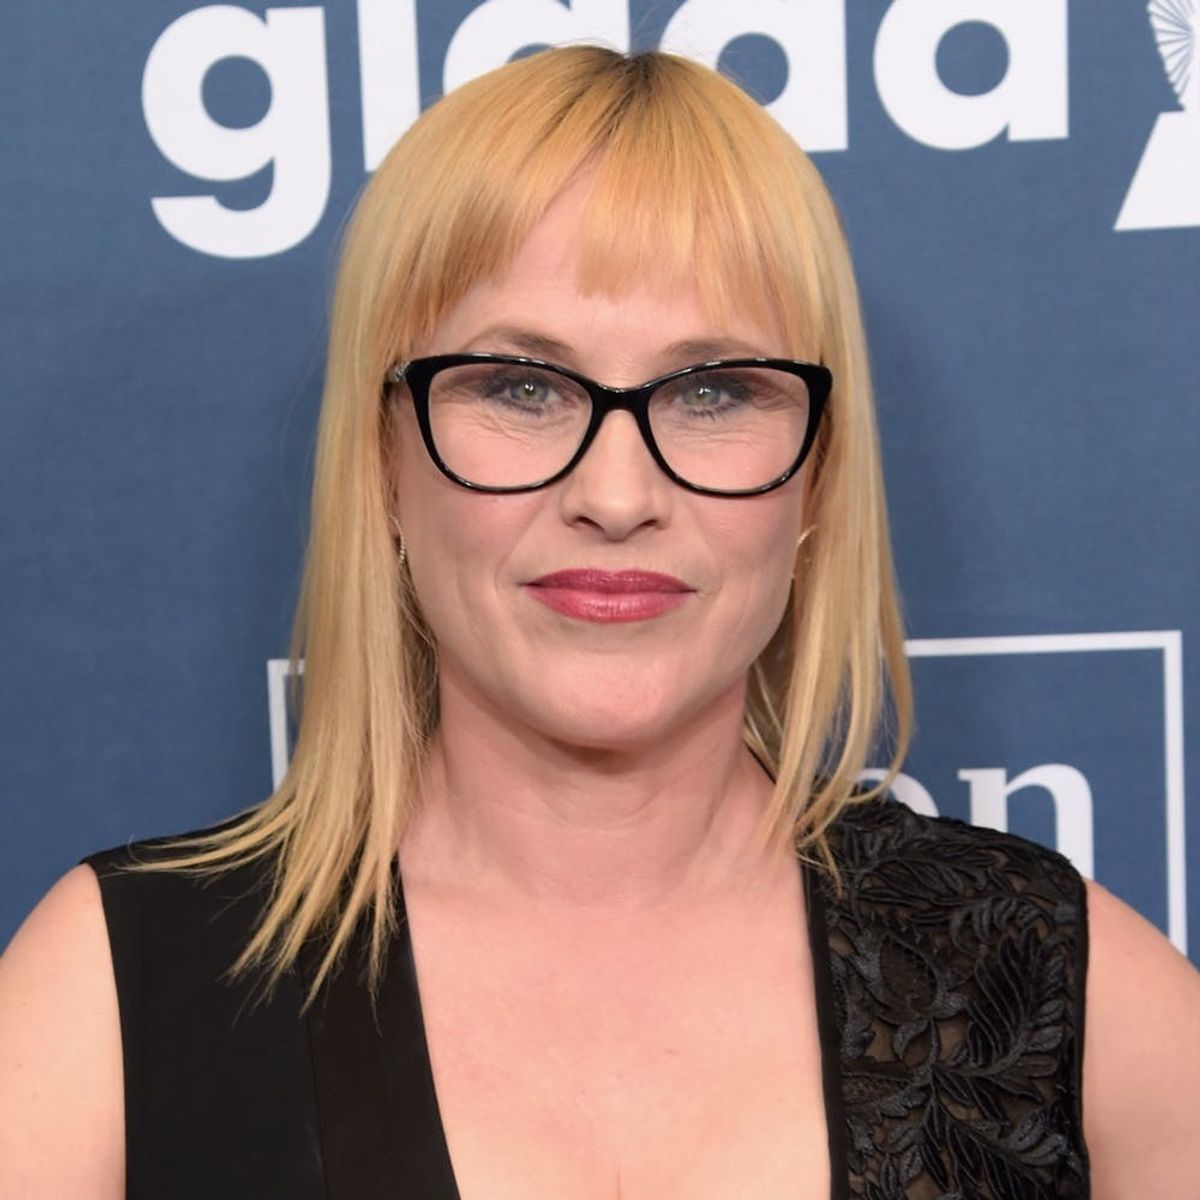 Patricia Arquette Is Calling Out This Glaring Omission at the Oscars